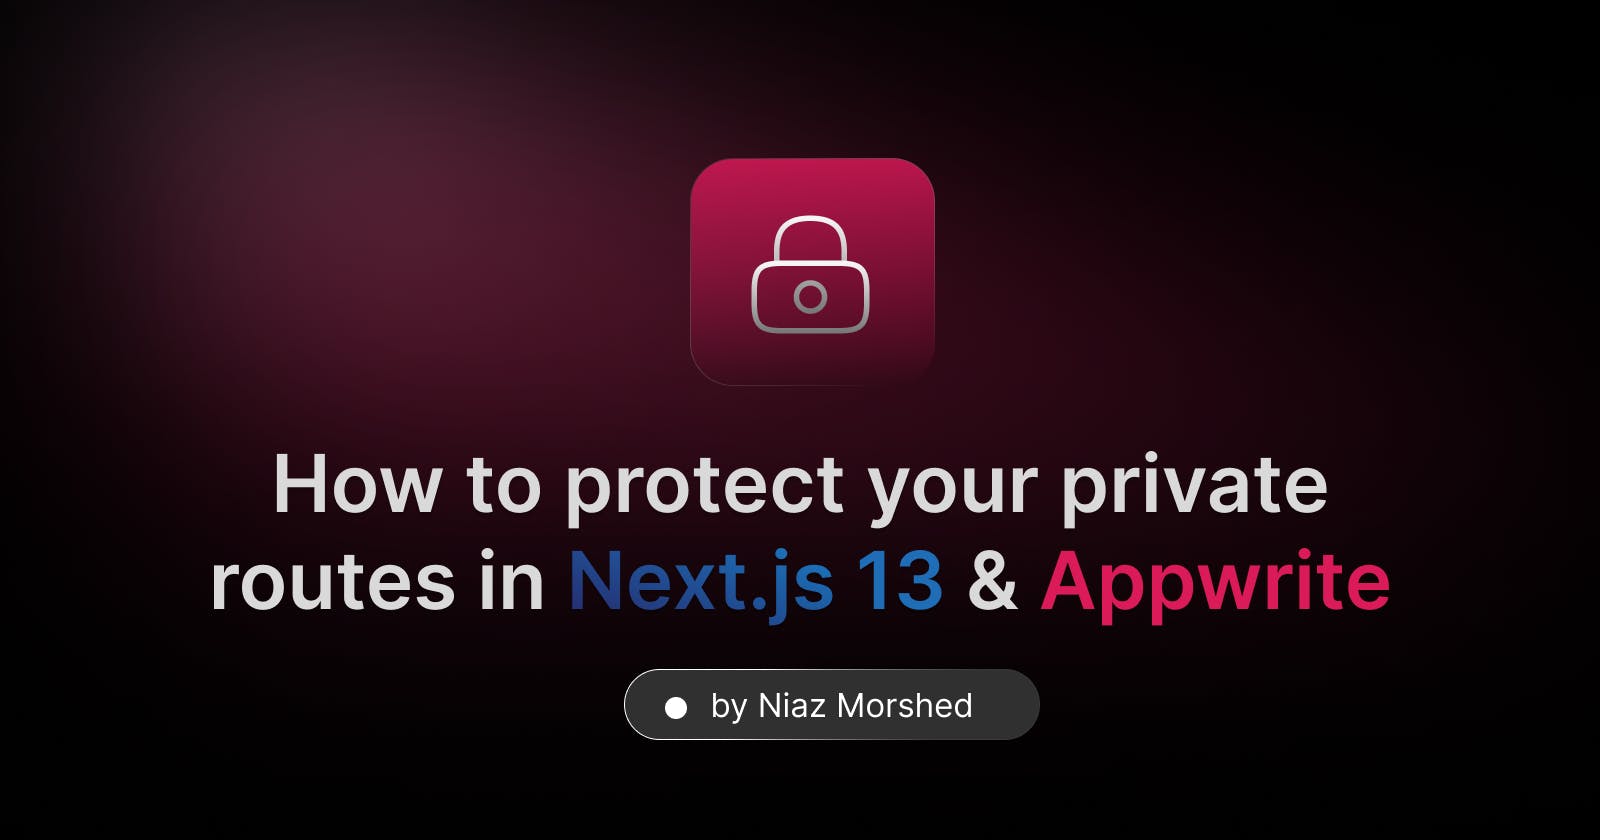 How to protect your private routes in Next.js 13 & Appwrite?